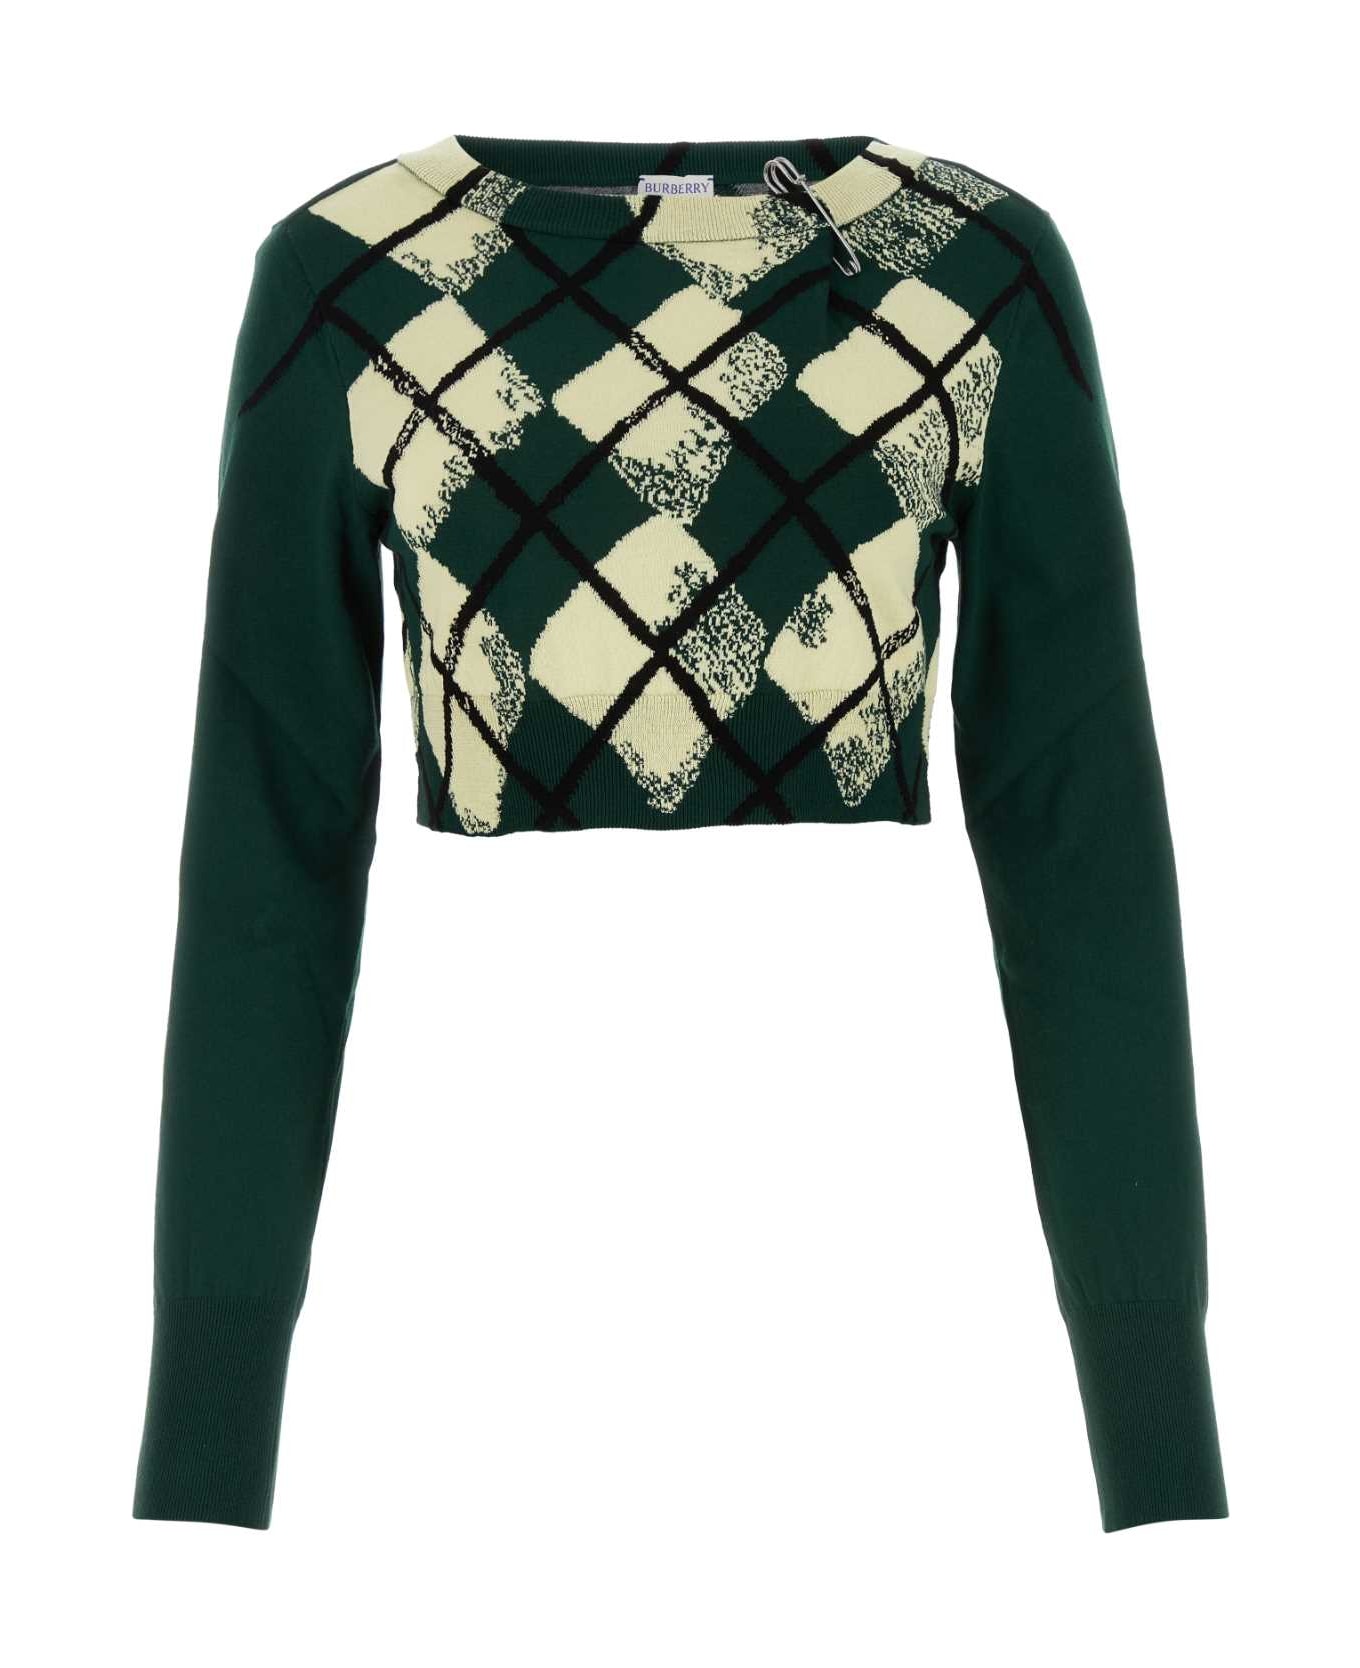 Burberry Bottle Green Cotton Sweater - IVY